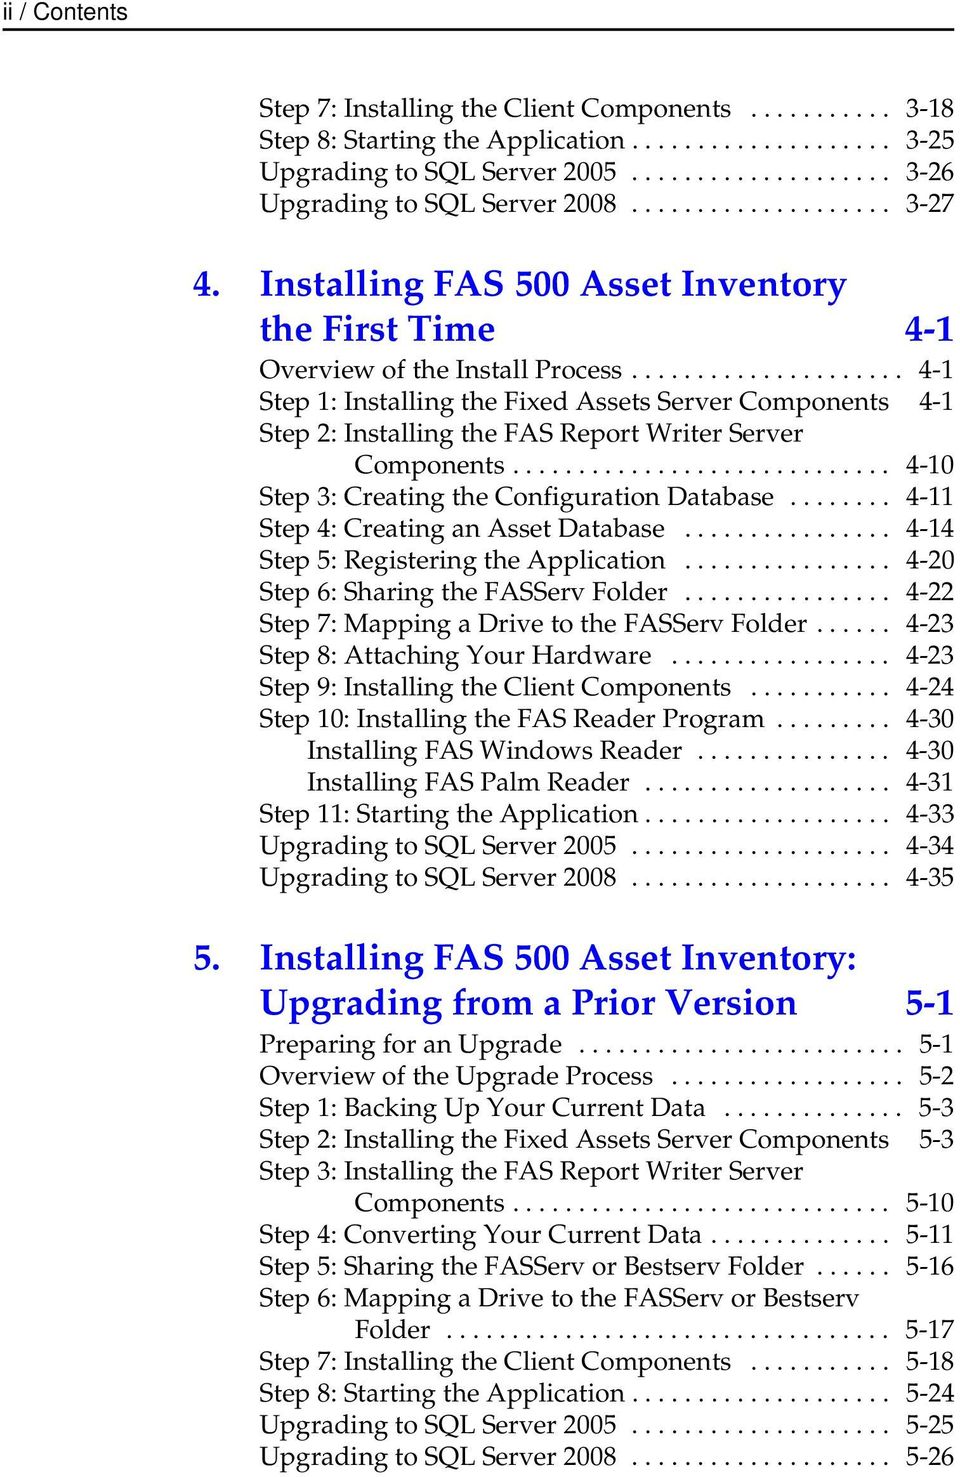 .................... 4-1 Step 1: Installing the Fixed Assets Server Components 4-1 Step 2: Installing the FAS Report Writer Server Components............................. 4-10 Step 3: Creating the Configuration Database.